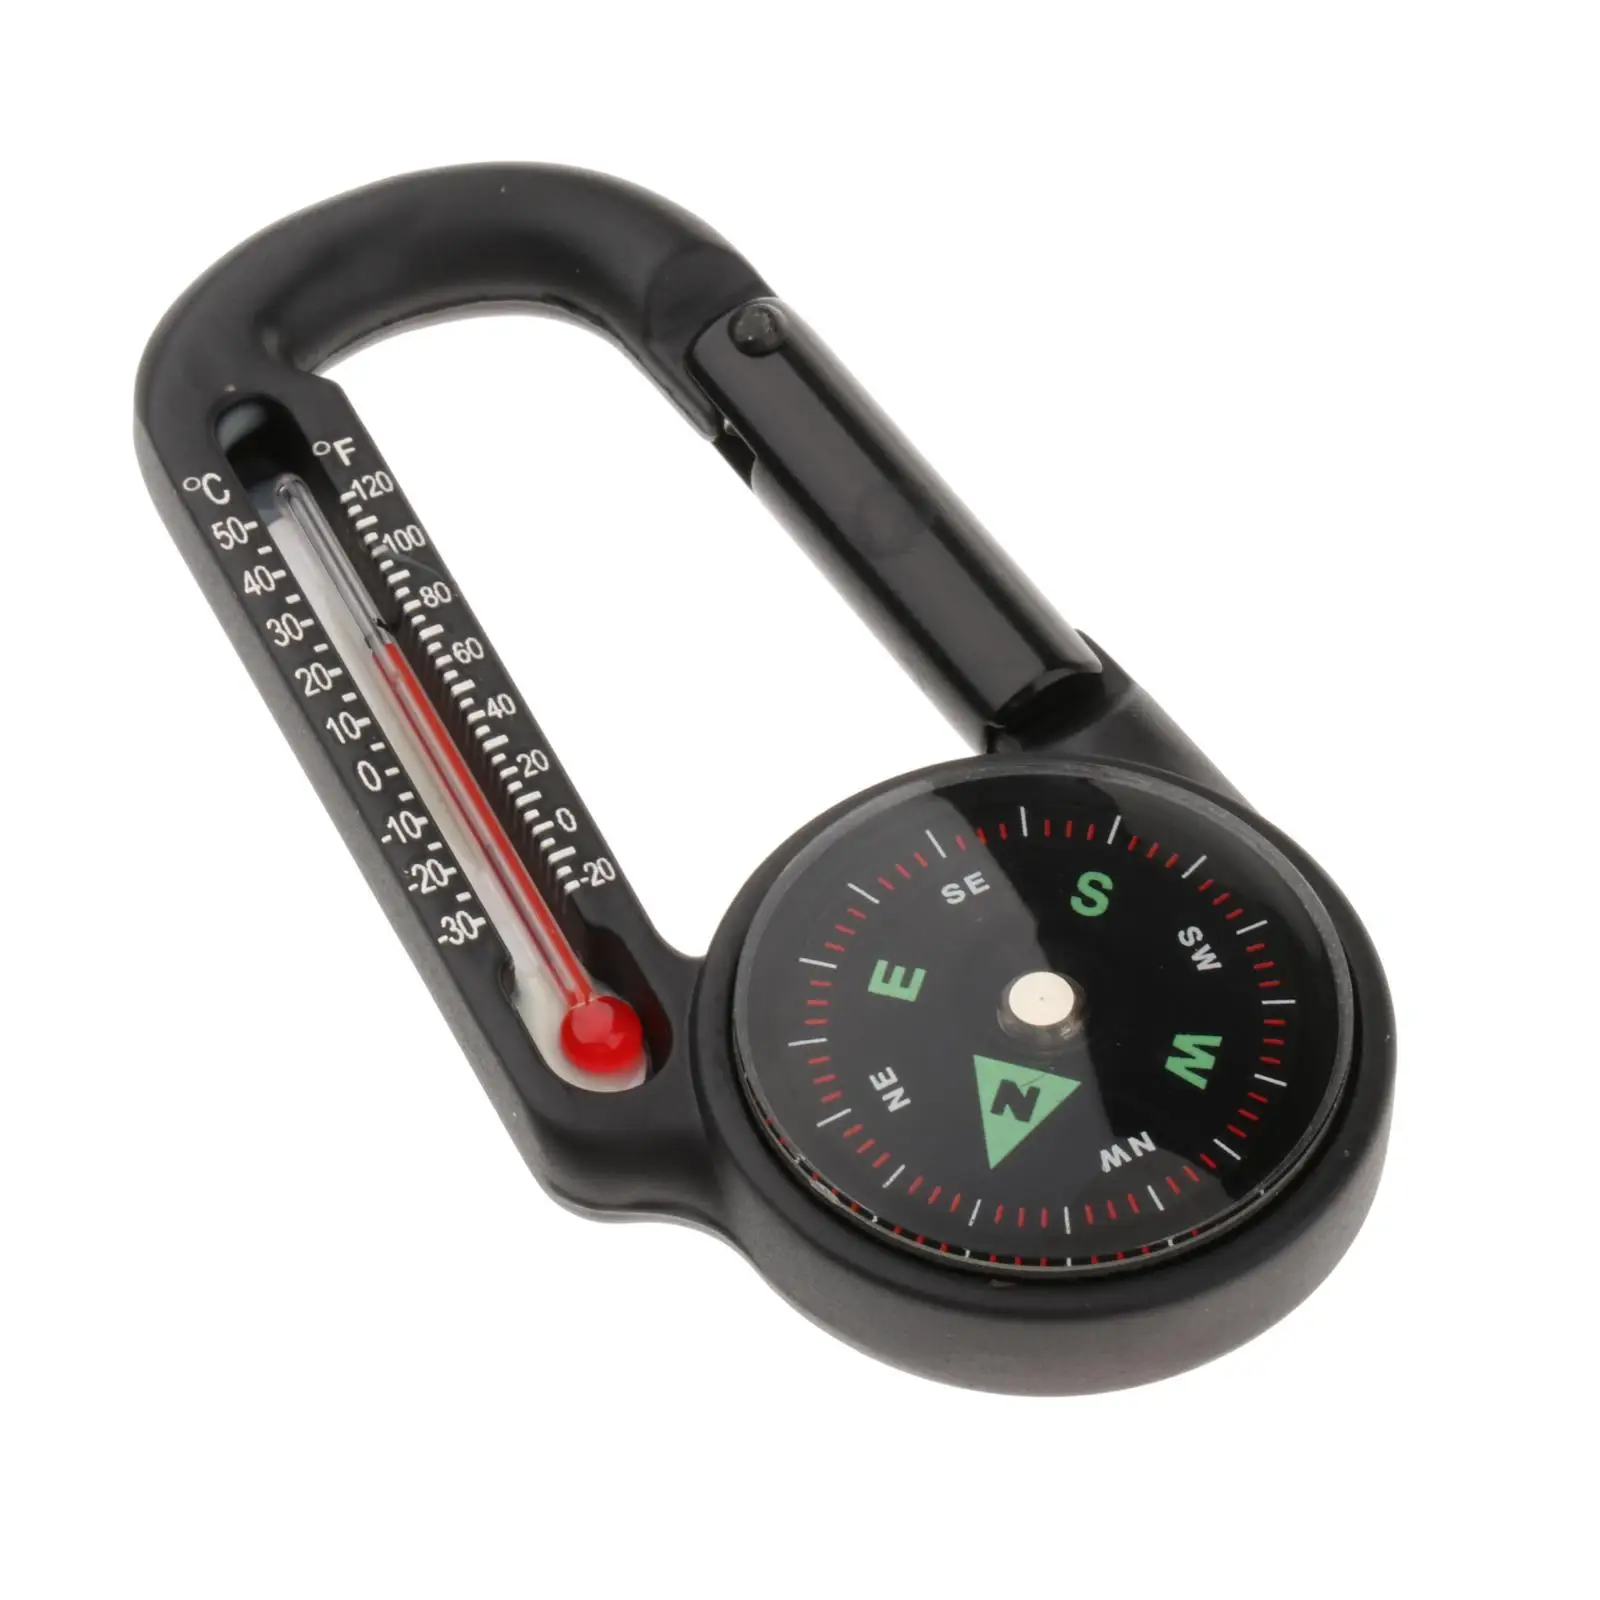 Fanthee Outdoor Thermometer,Outdoor Hiking Clasp Buckle Hook Keychain Ring Compass Thermometer Carabiner 